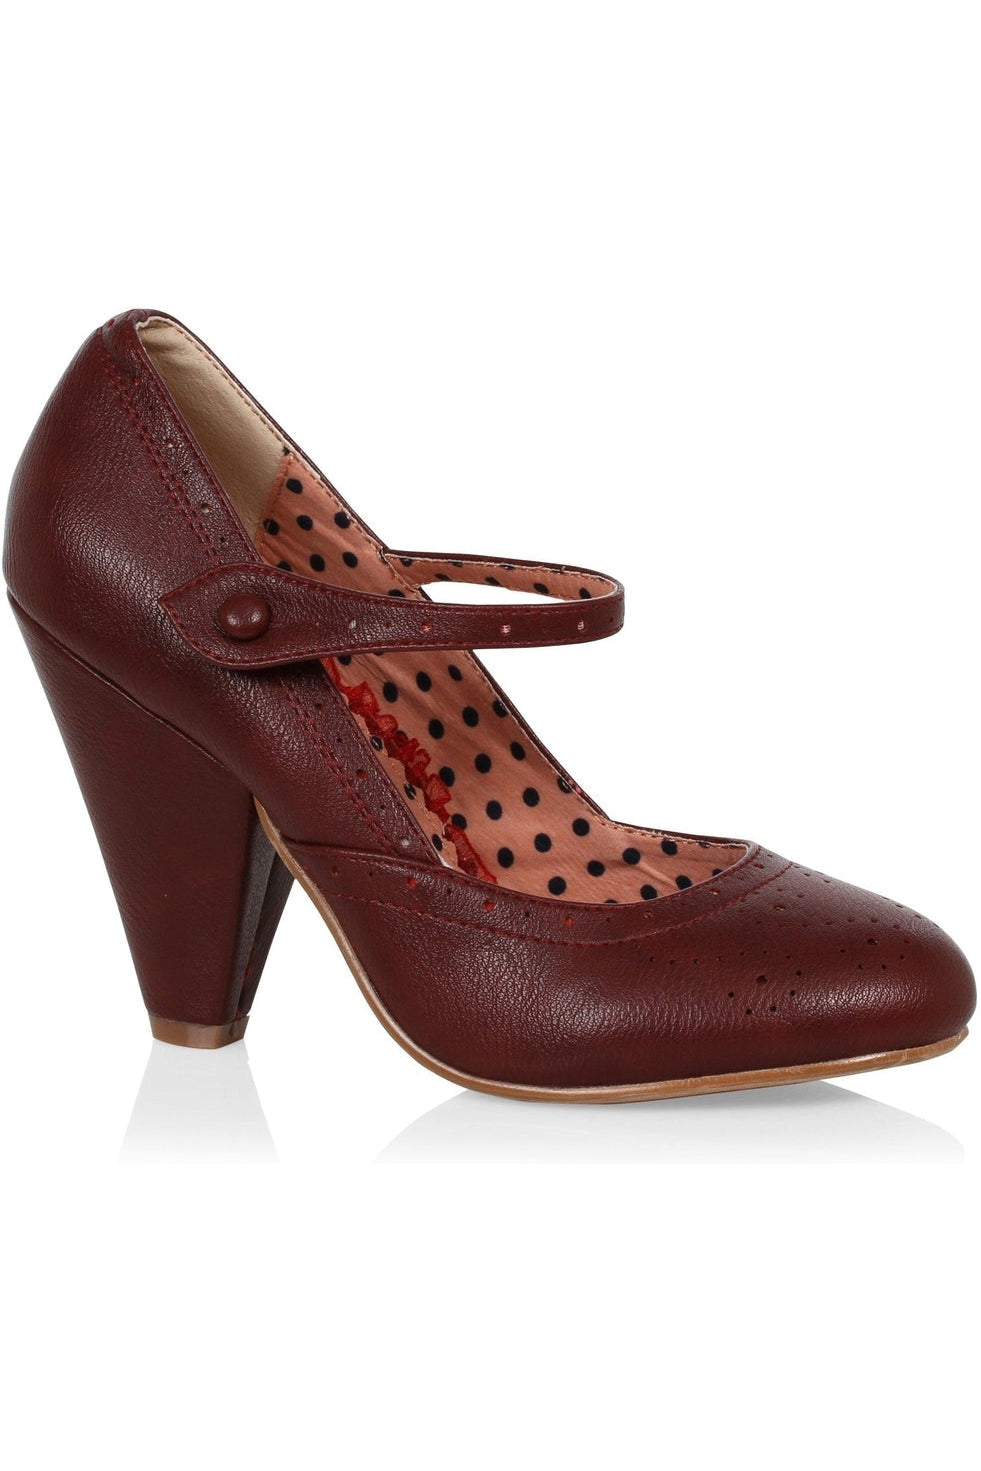 Bettie Page Elanor Mary Jane | Burgundy Faux Leather-Mary Janes-Bettie Page by Ellie-SEXYSHOES.COM